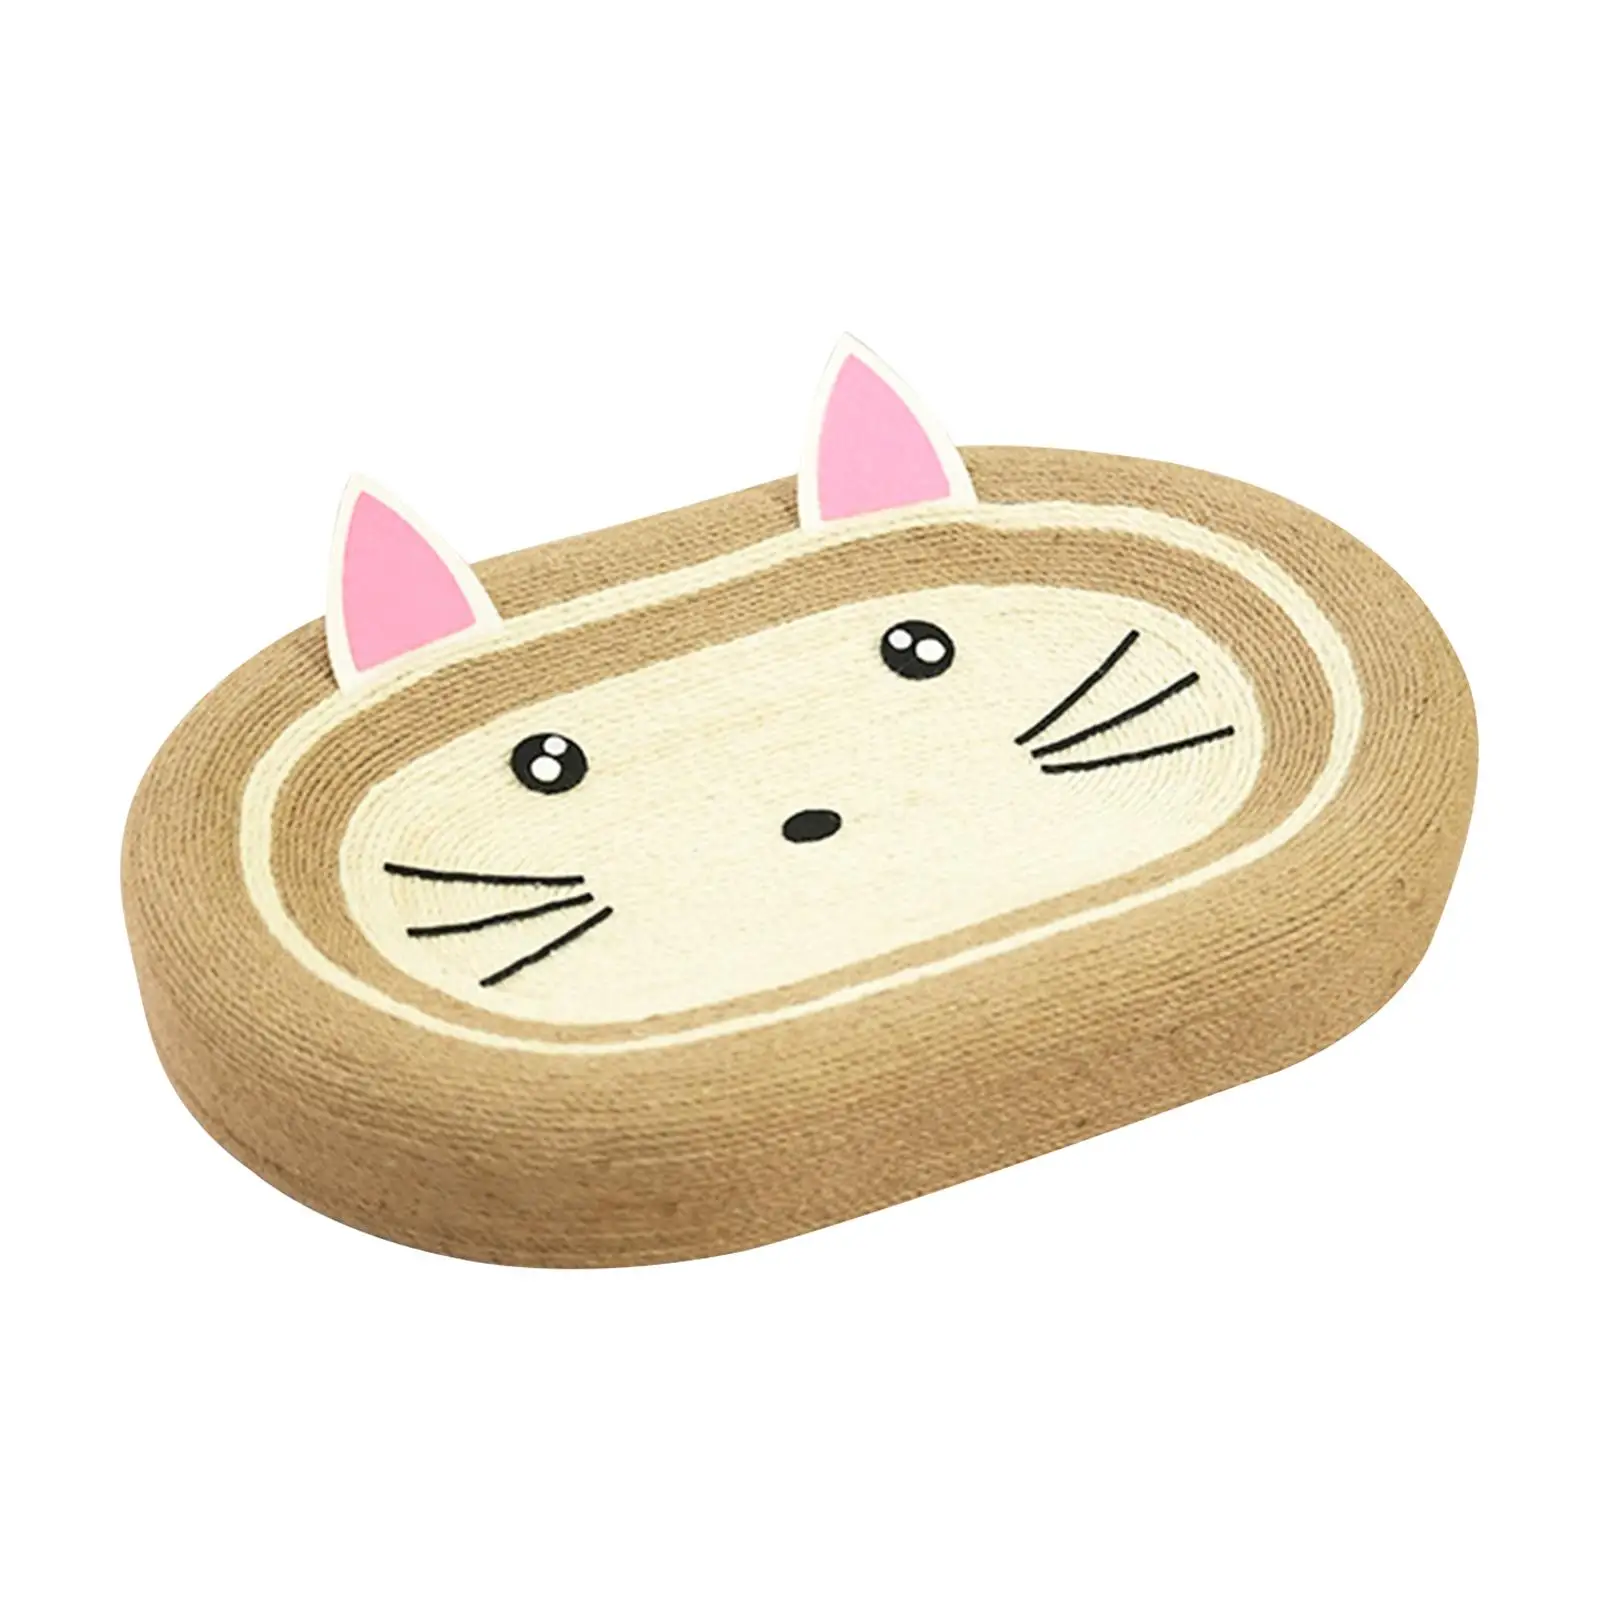 2 in 1 Cats Scratcher Toys for Indoor Cats Grinding Claw Cat Scratch Pad